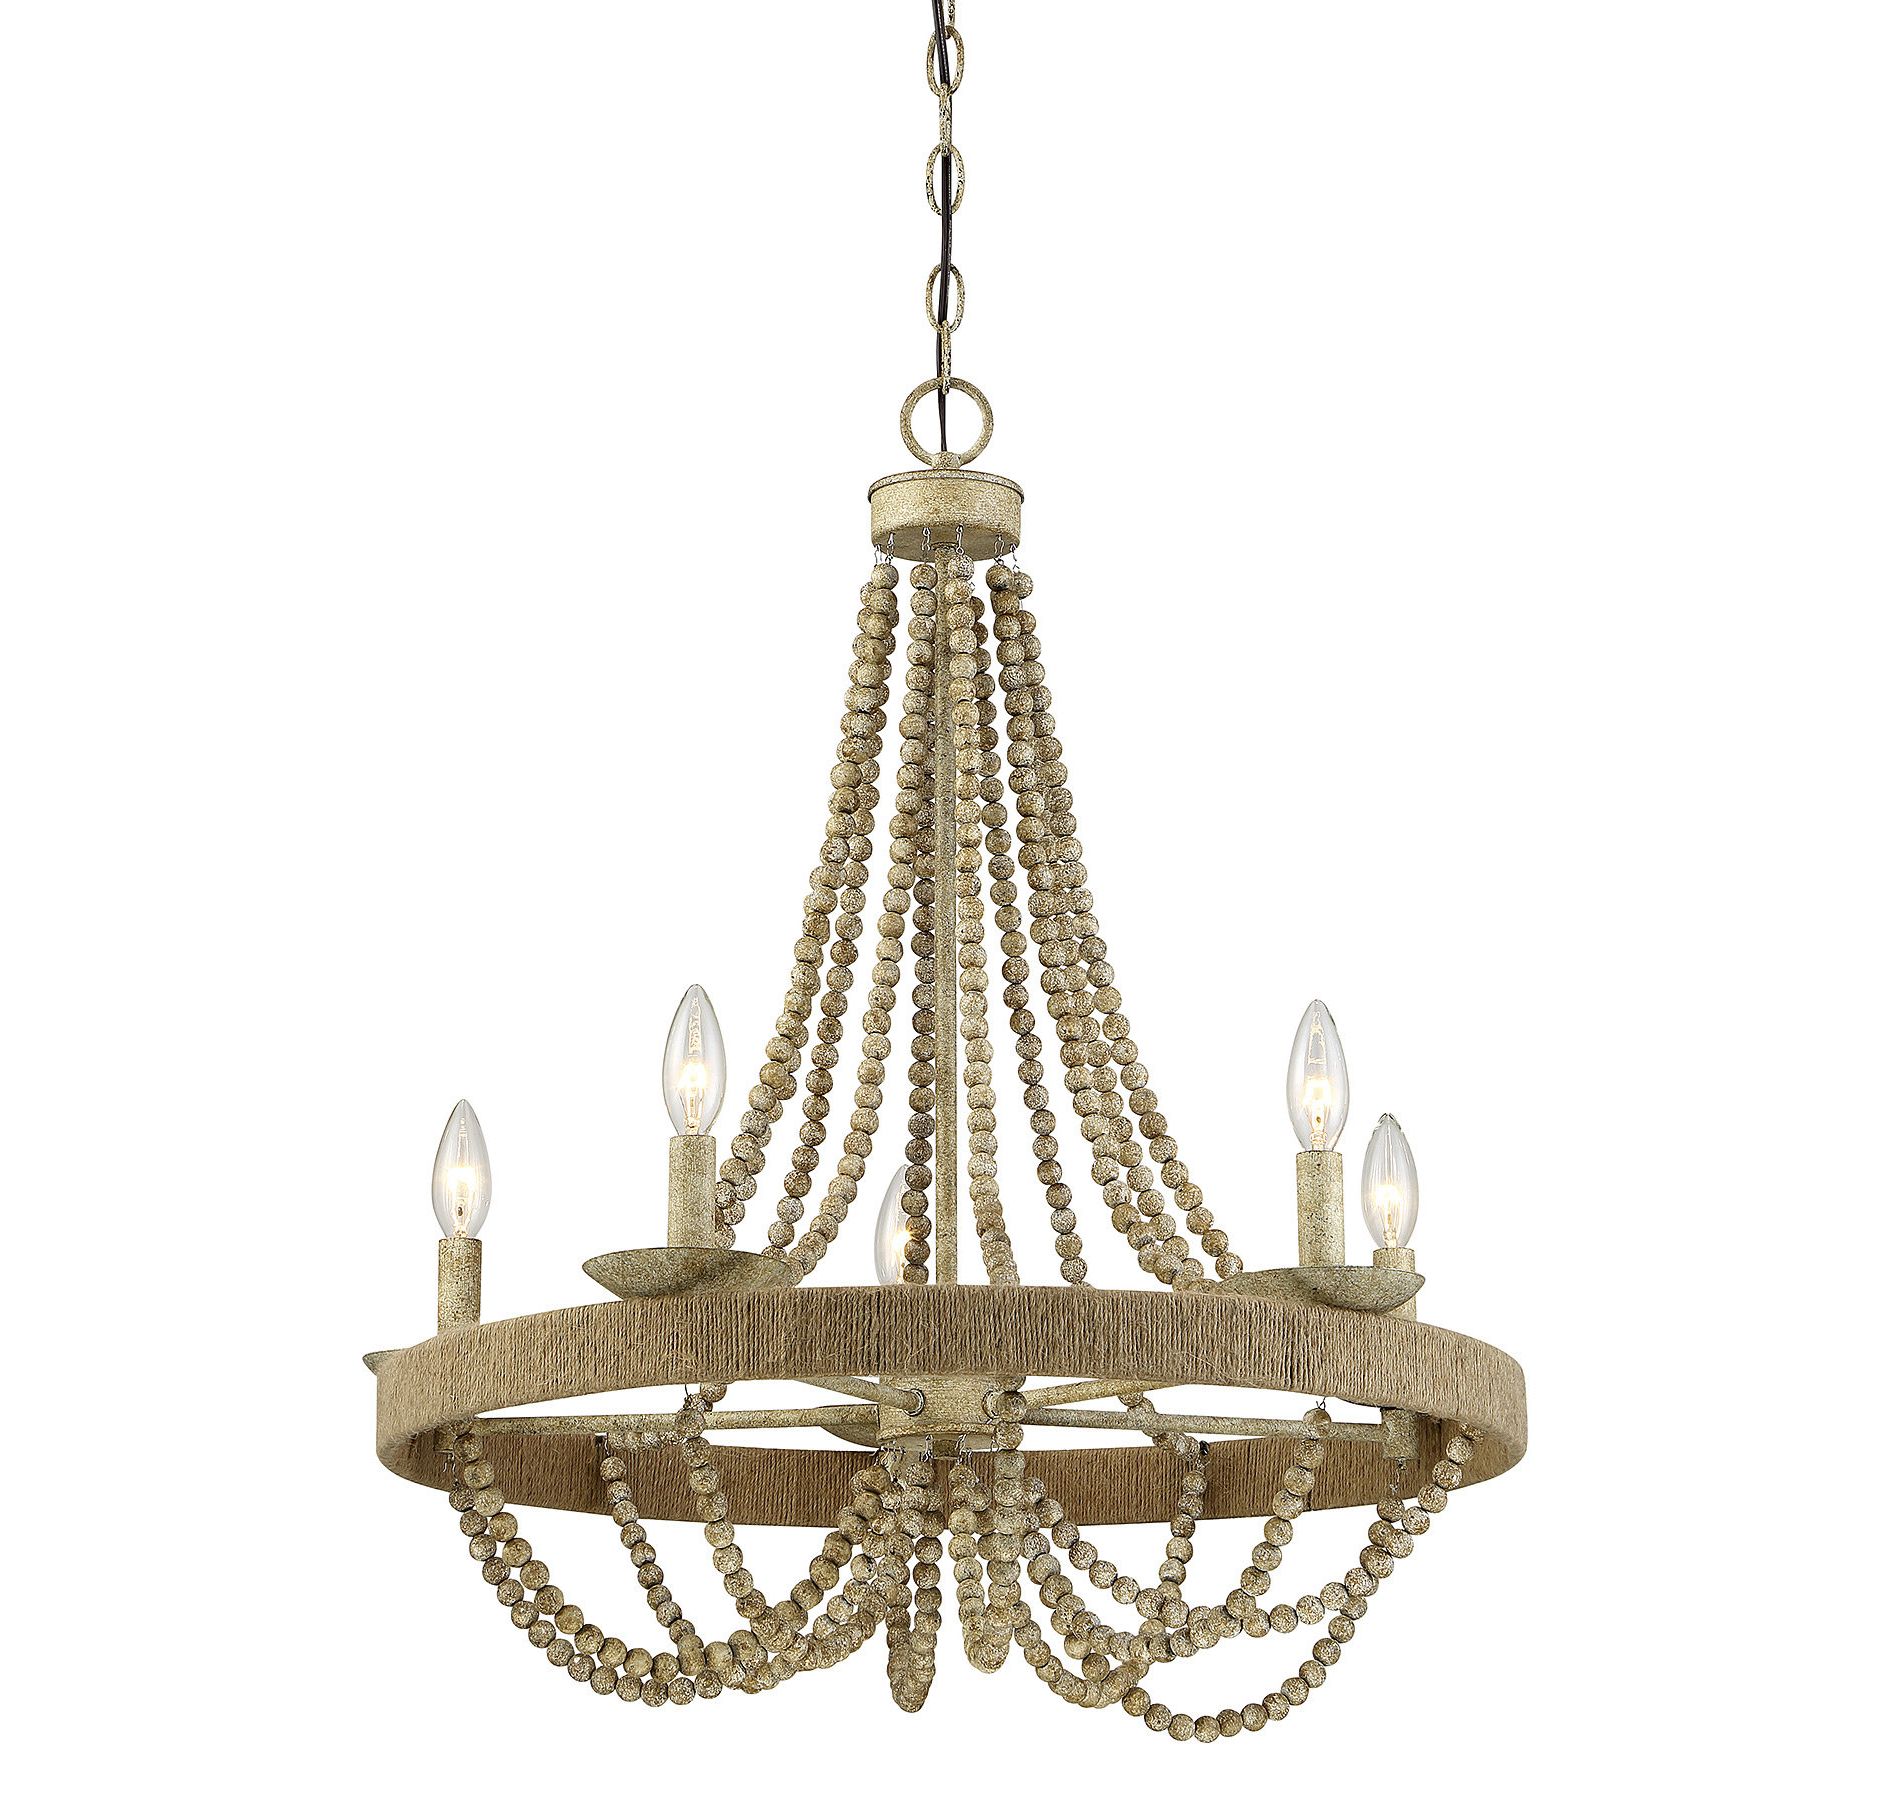 Duron 5 Light Empire Chandeliers Within Current Duron 5 Light Empire Chandelier (View 1 of 20)